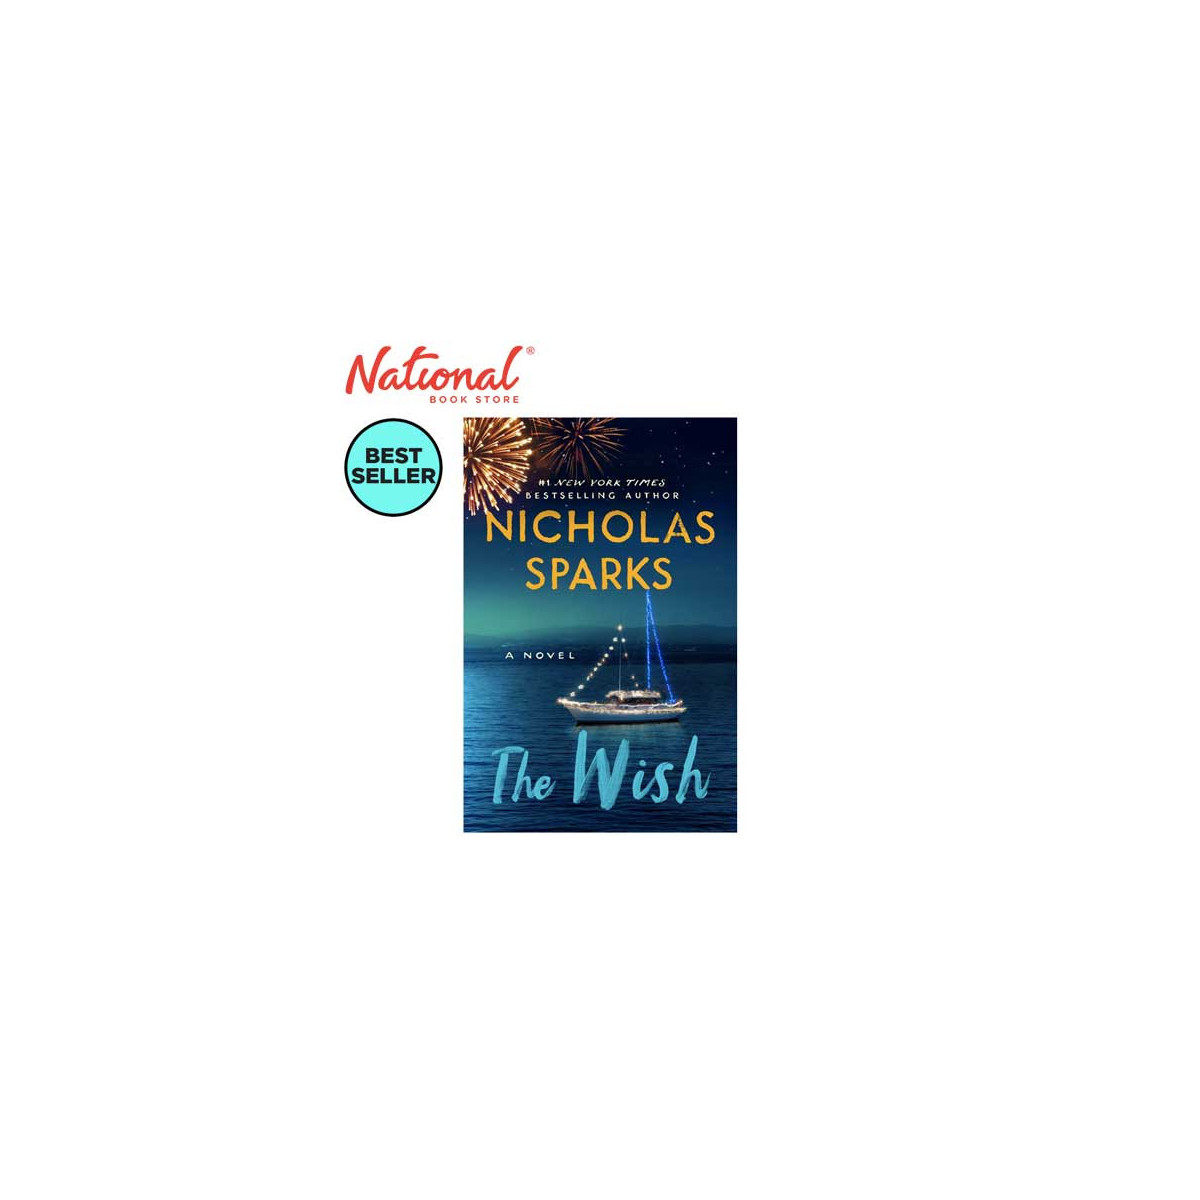 The Wish Trade Paperback by Nicholas Sparks